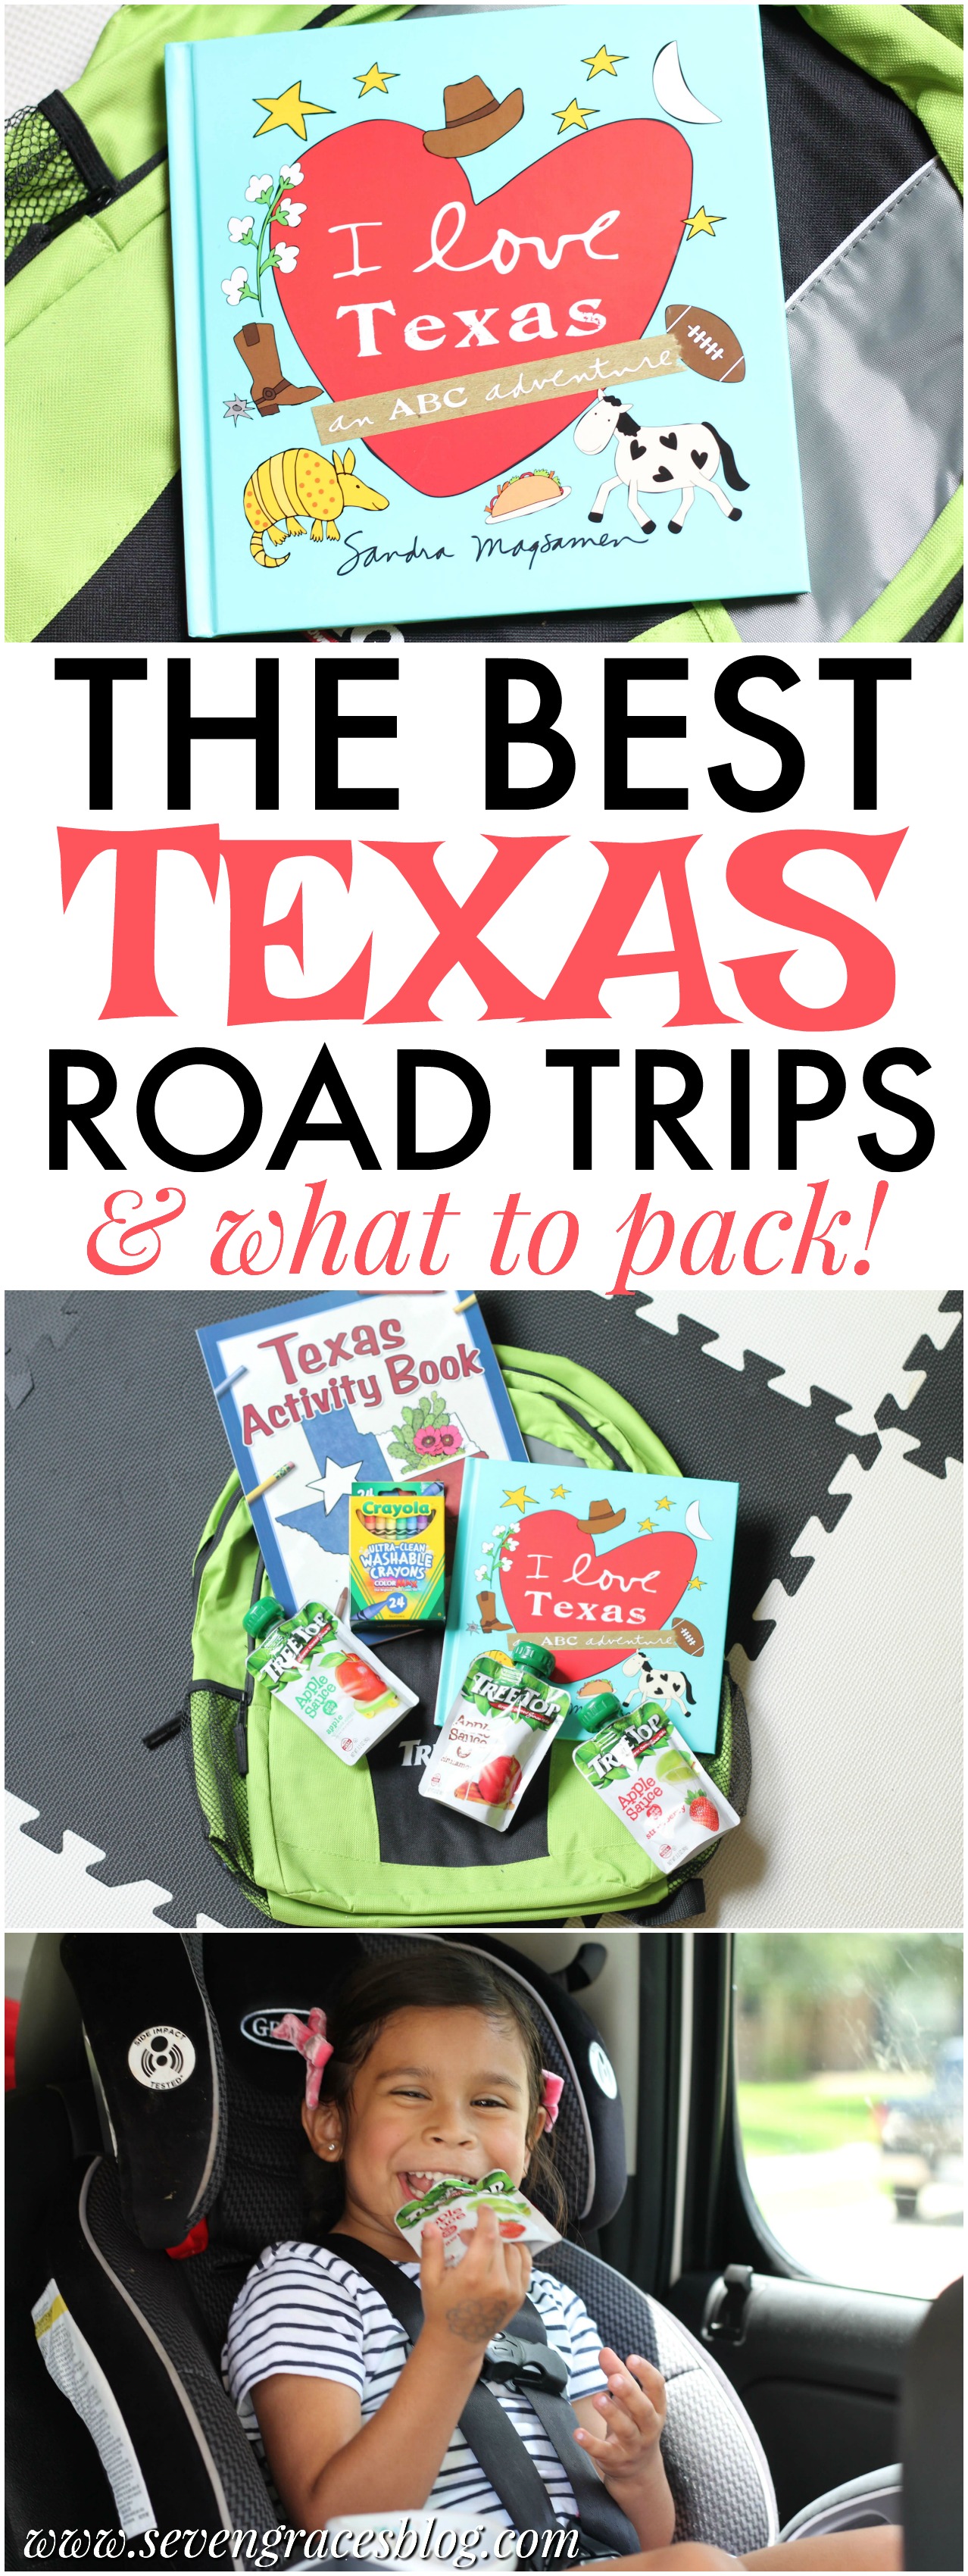 The ultimate Texas road trip destination guide! The best list of places to go and sites to see in all of Texas. The best travel family bucket list for Texas. Need help on what to pack for a road trip? This Texas travel guide covers it! Grab some Tree Top apple sauce pouches and head out on an adventure! (AD) 